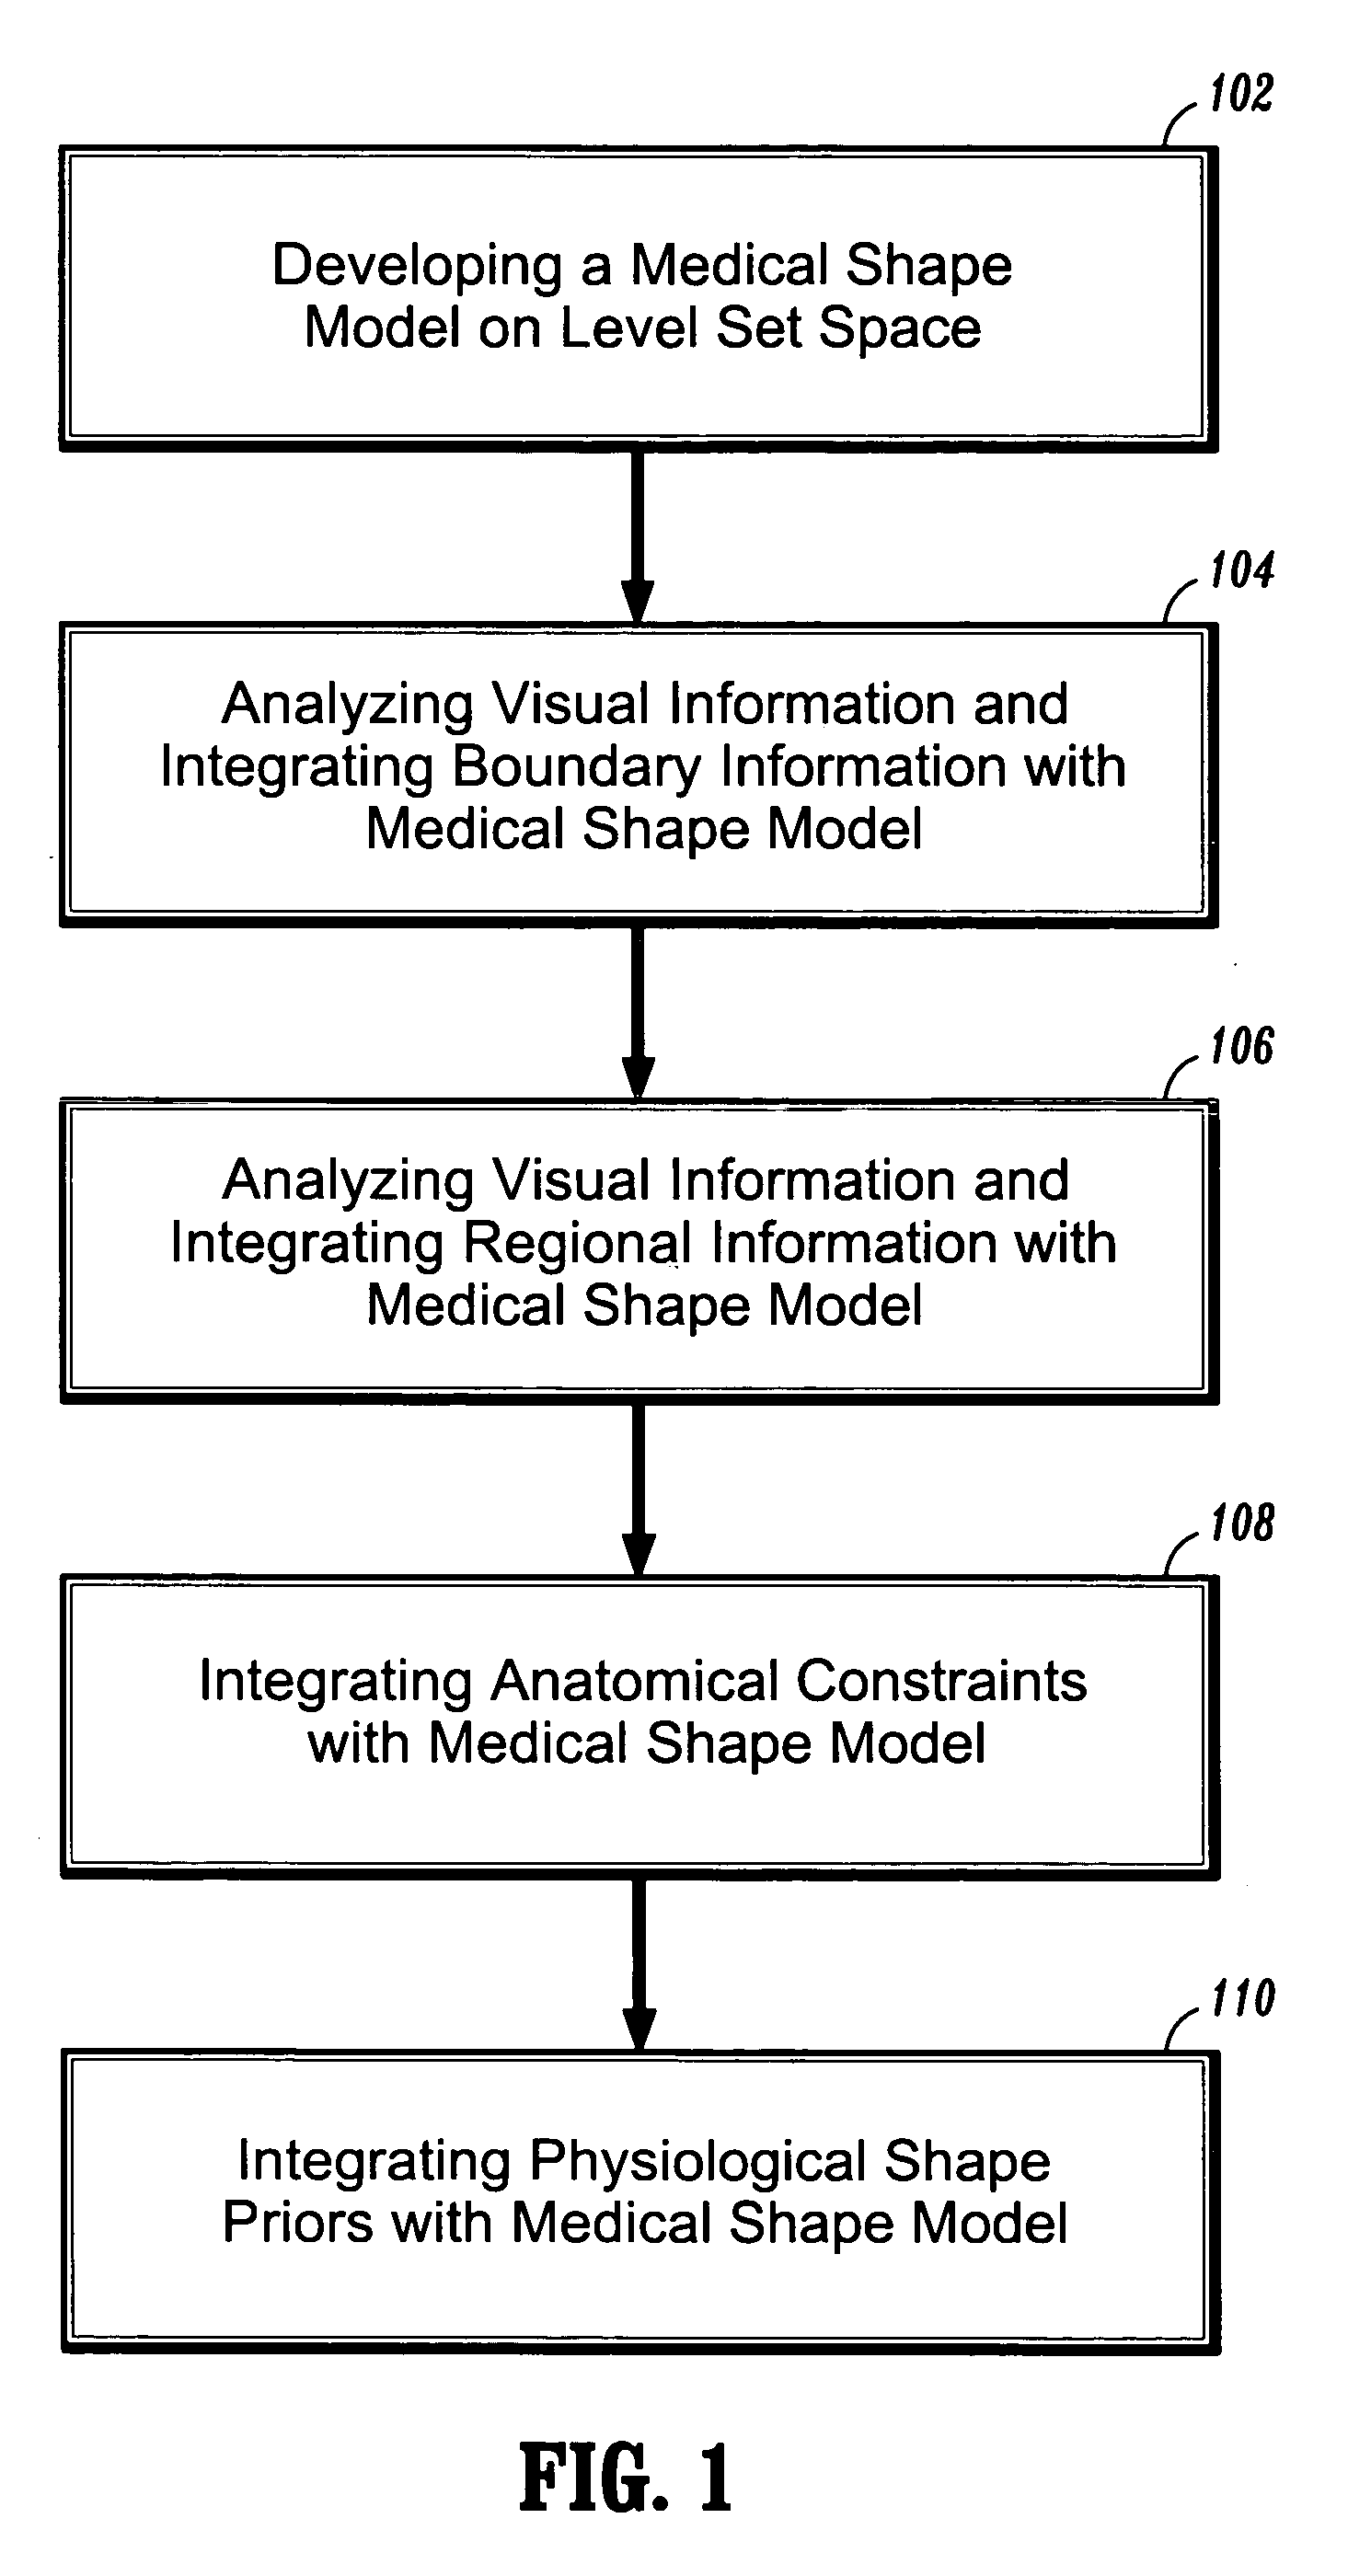 Integration of visual information, anatomic constraints and prior shape knowledge for medical segmentations